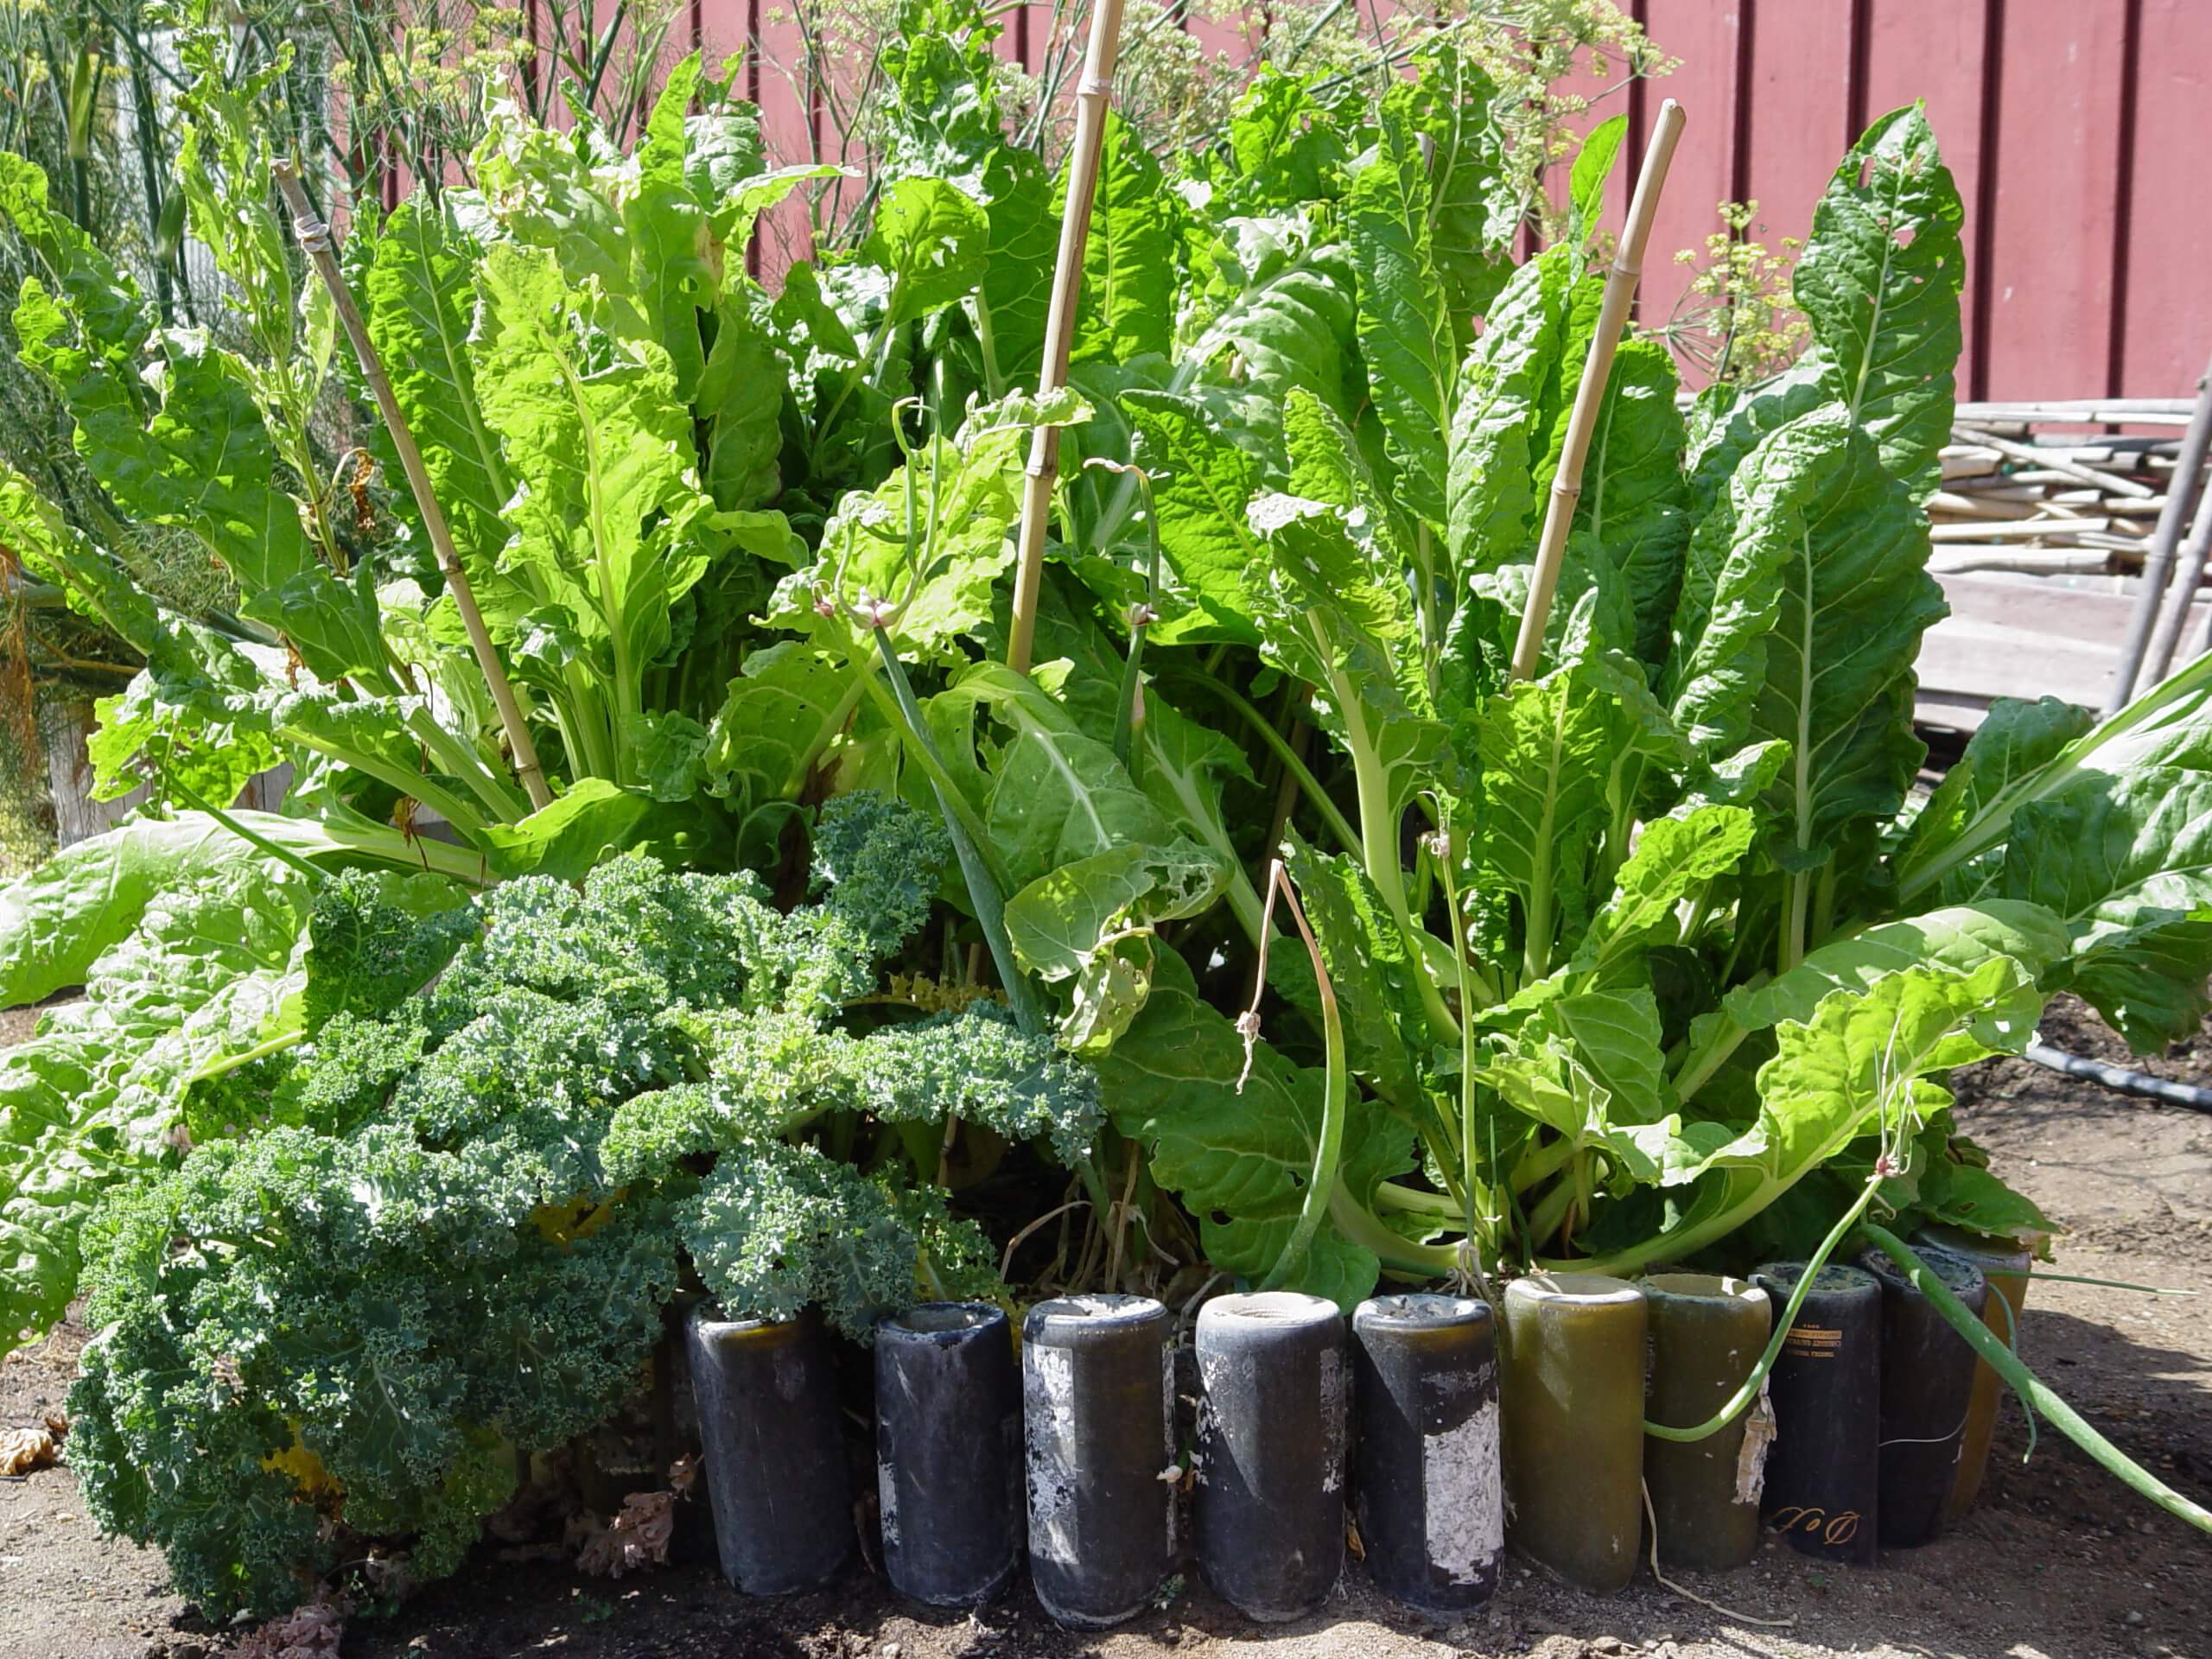 Bottles create a unique raised container for ruffled kale, the new "super food".